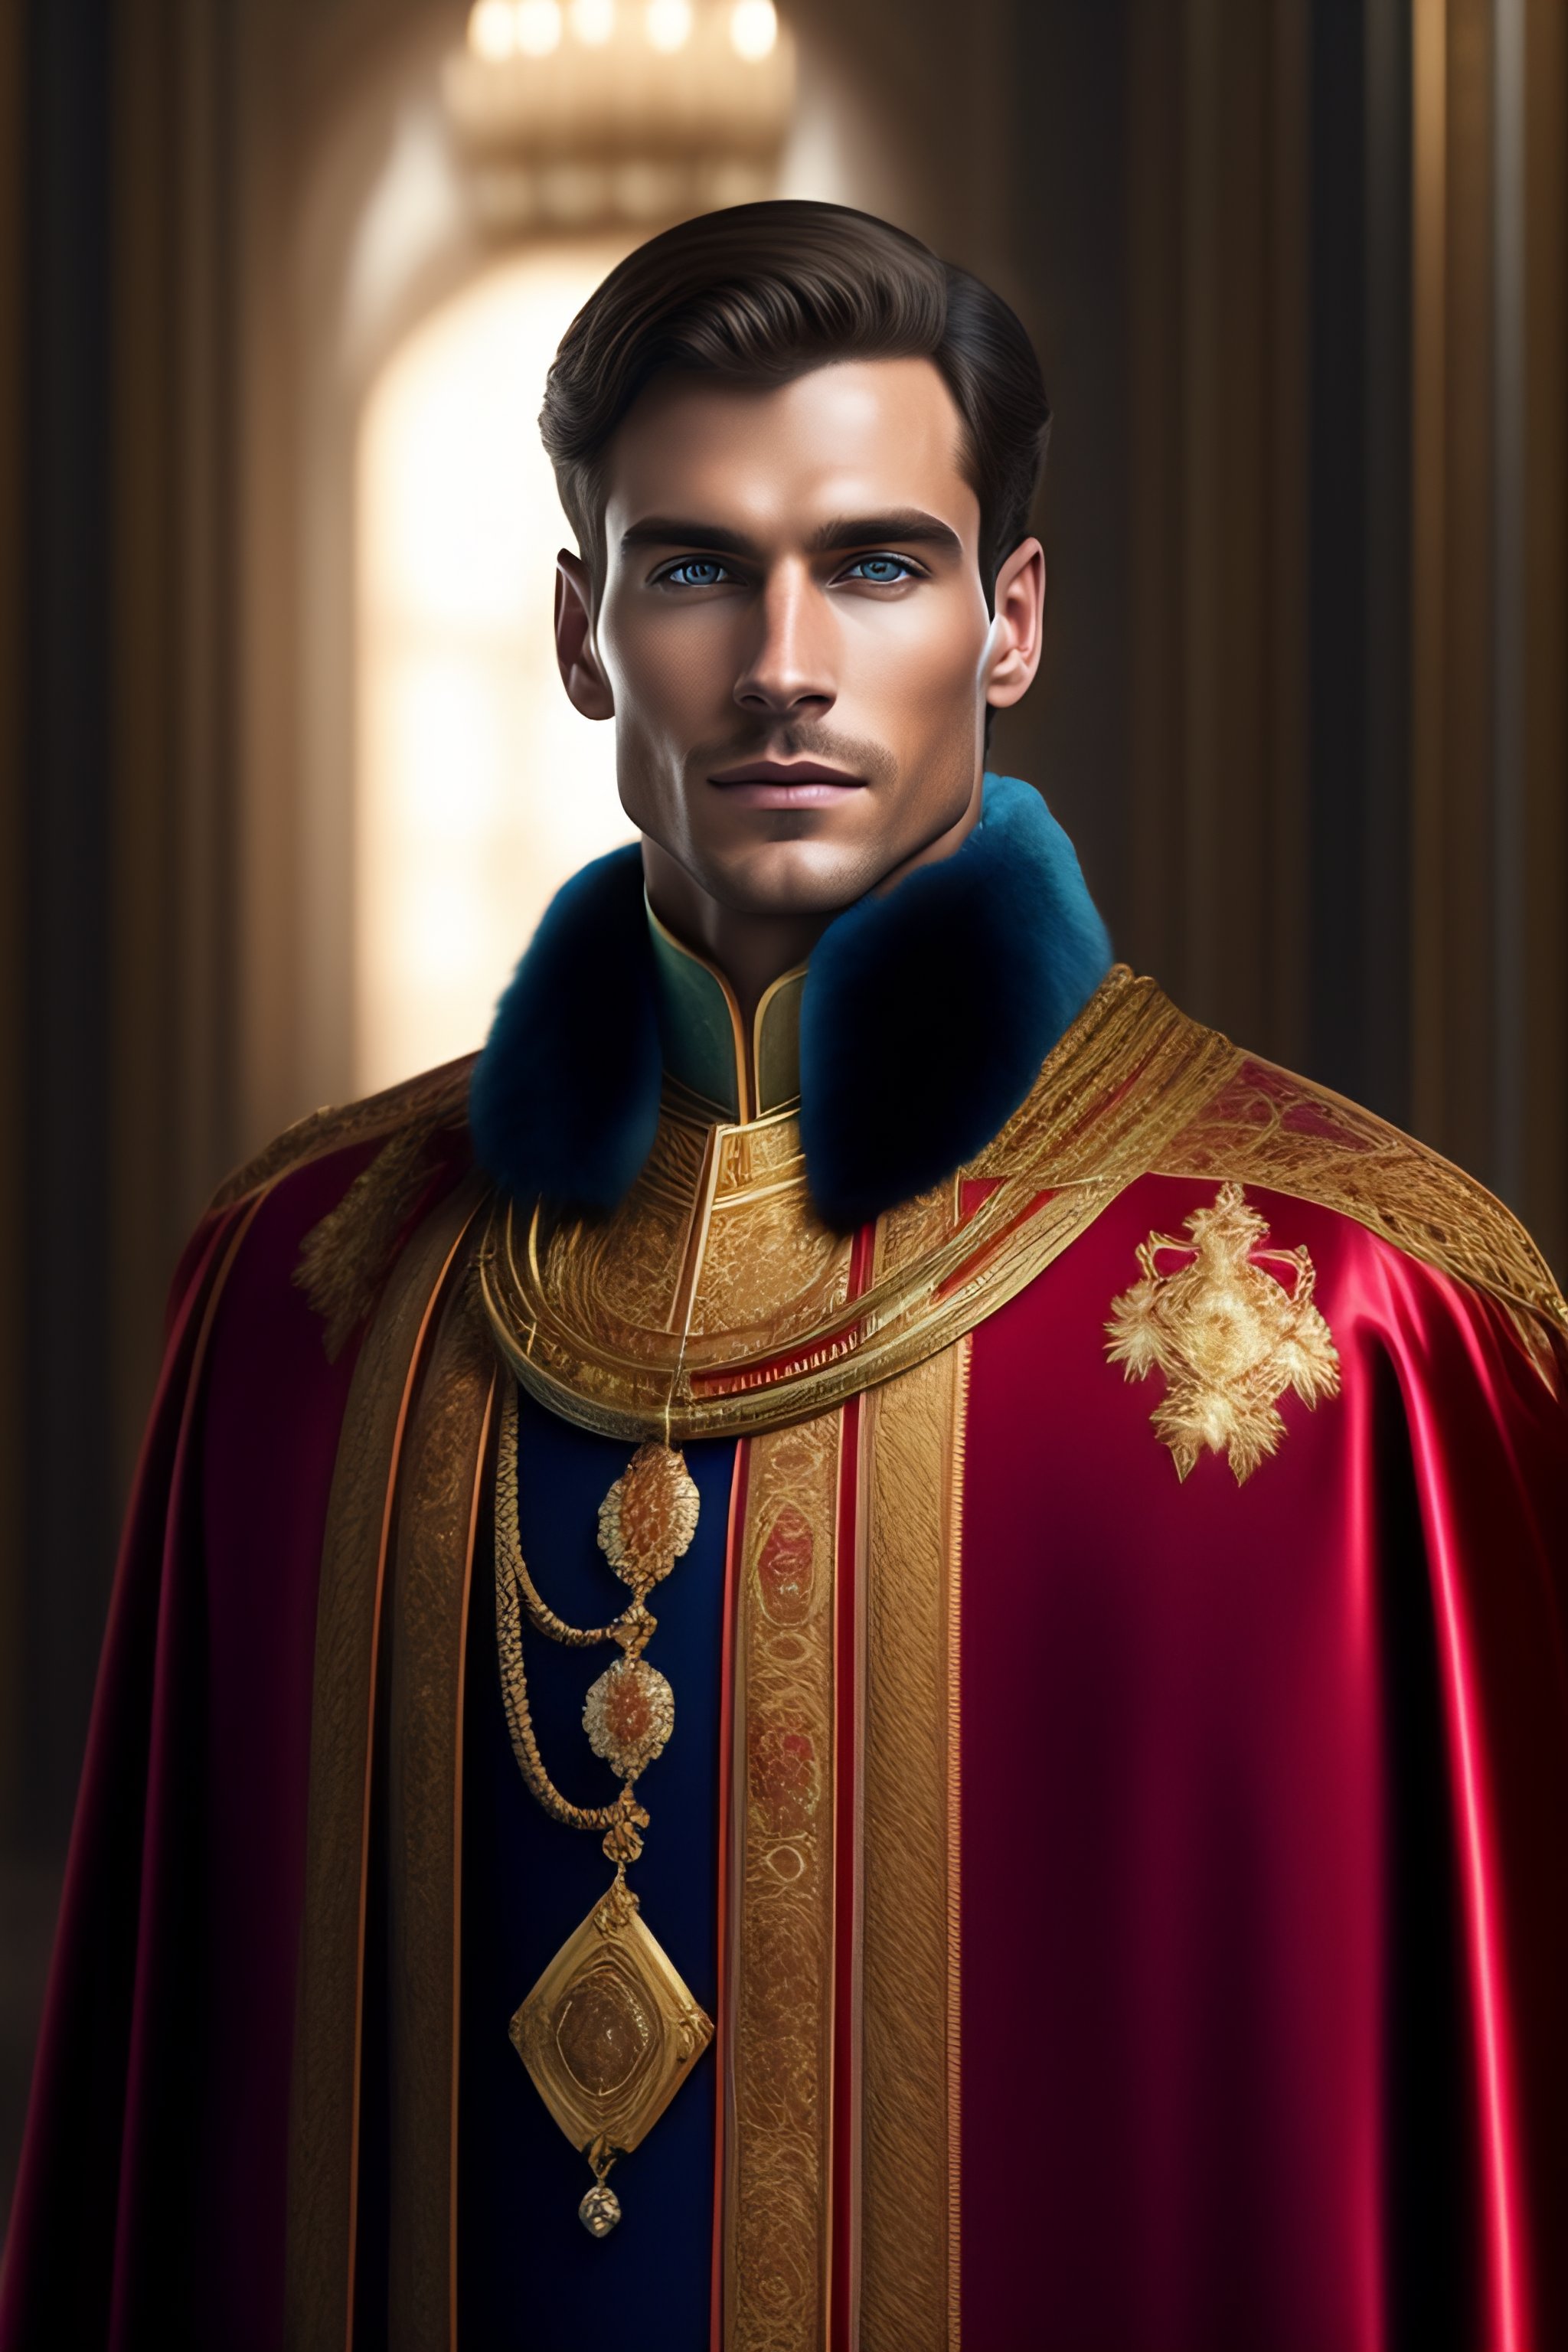 Lexica - Caucasian male, European male, dressed in royal robes, looking ...